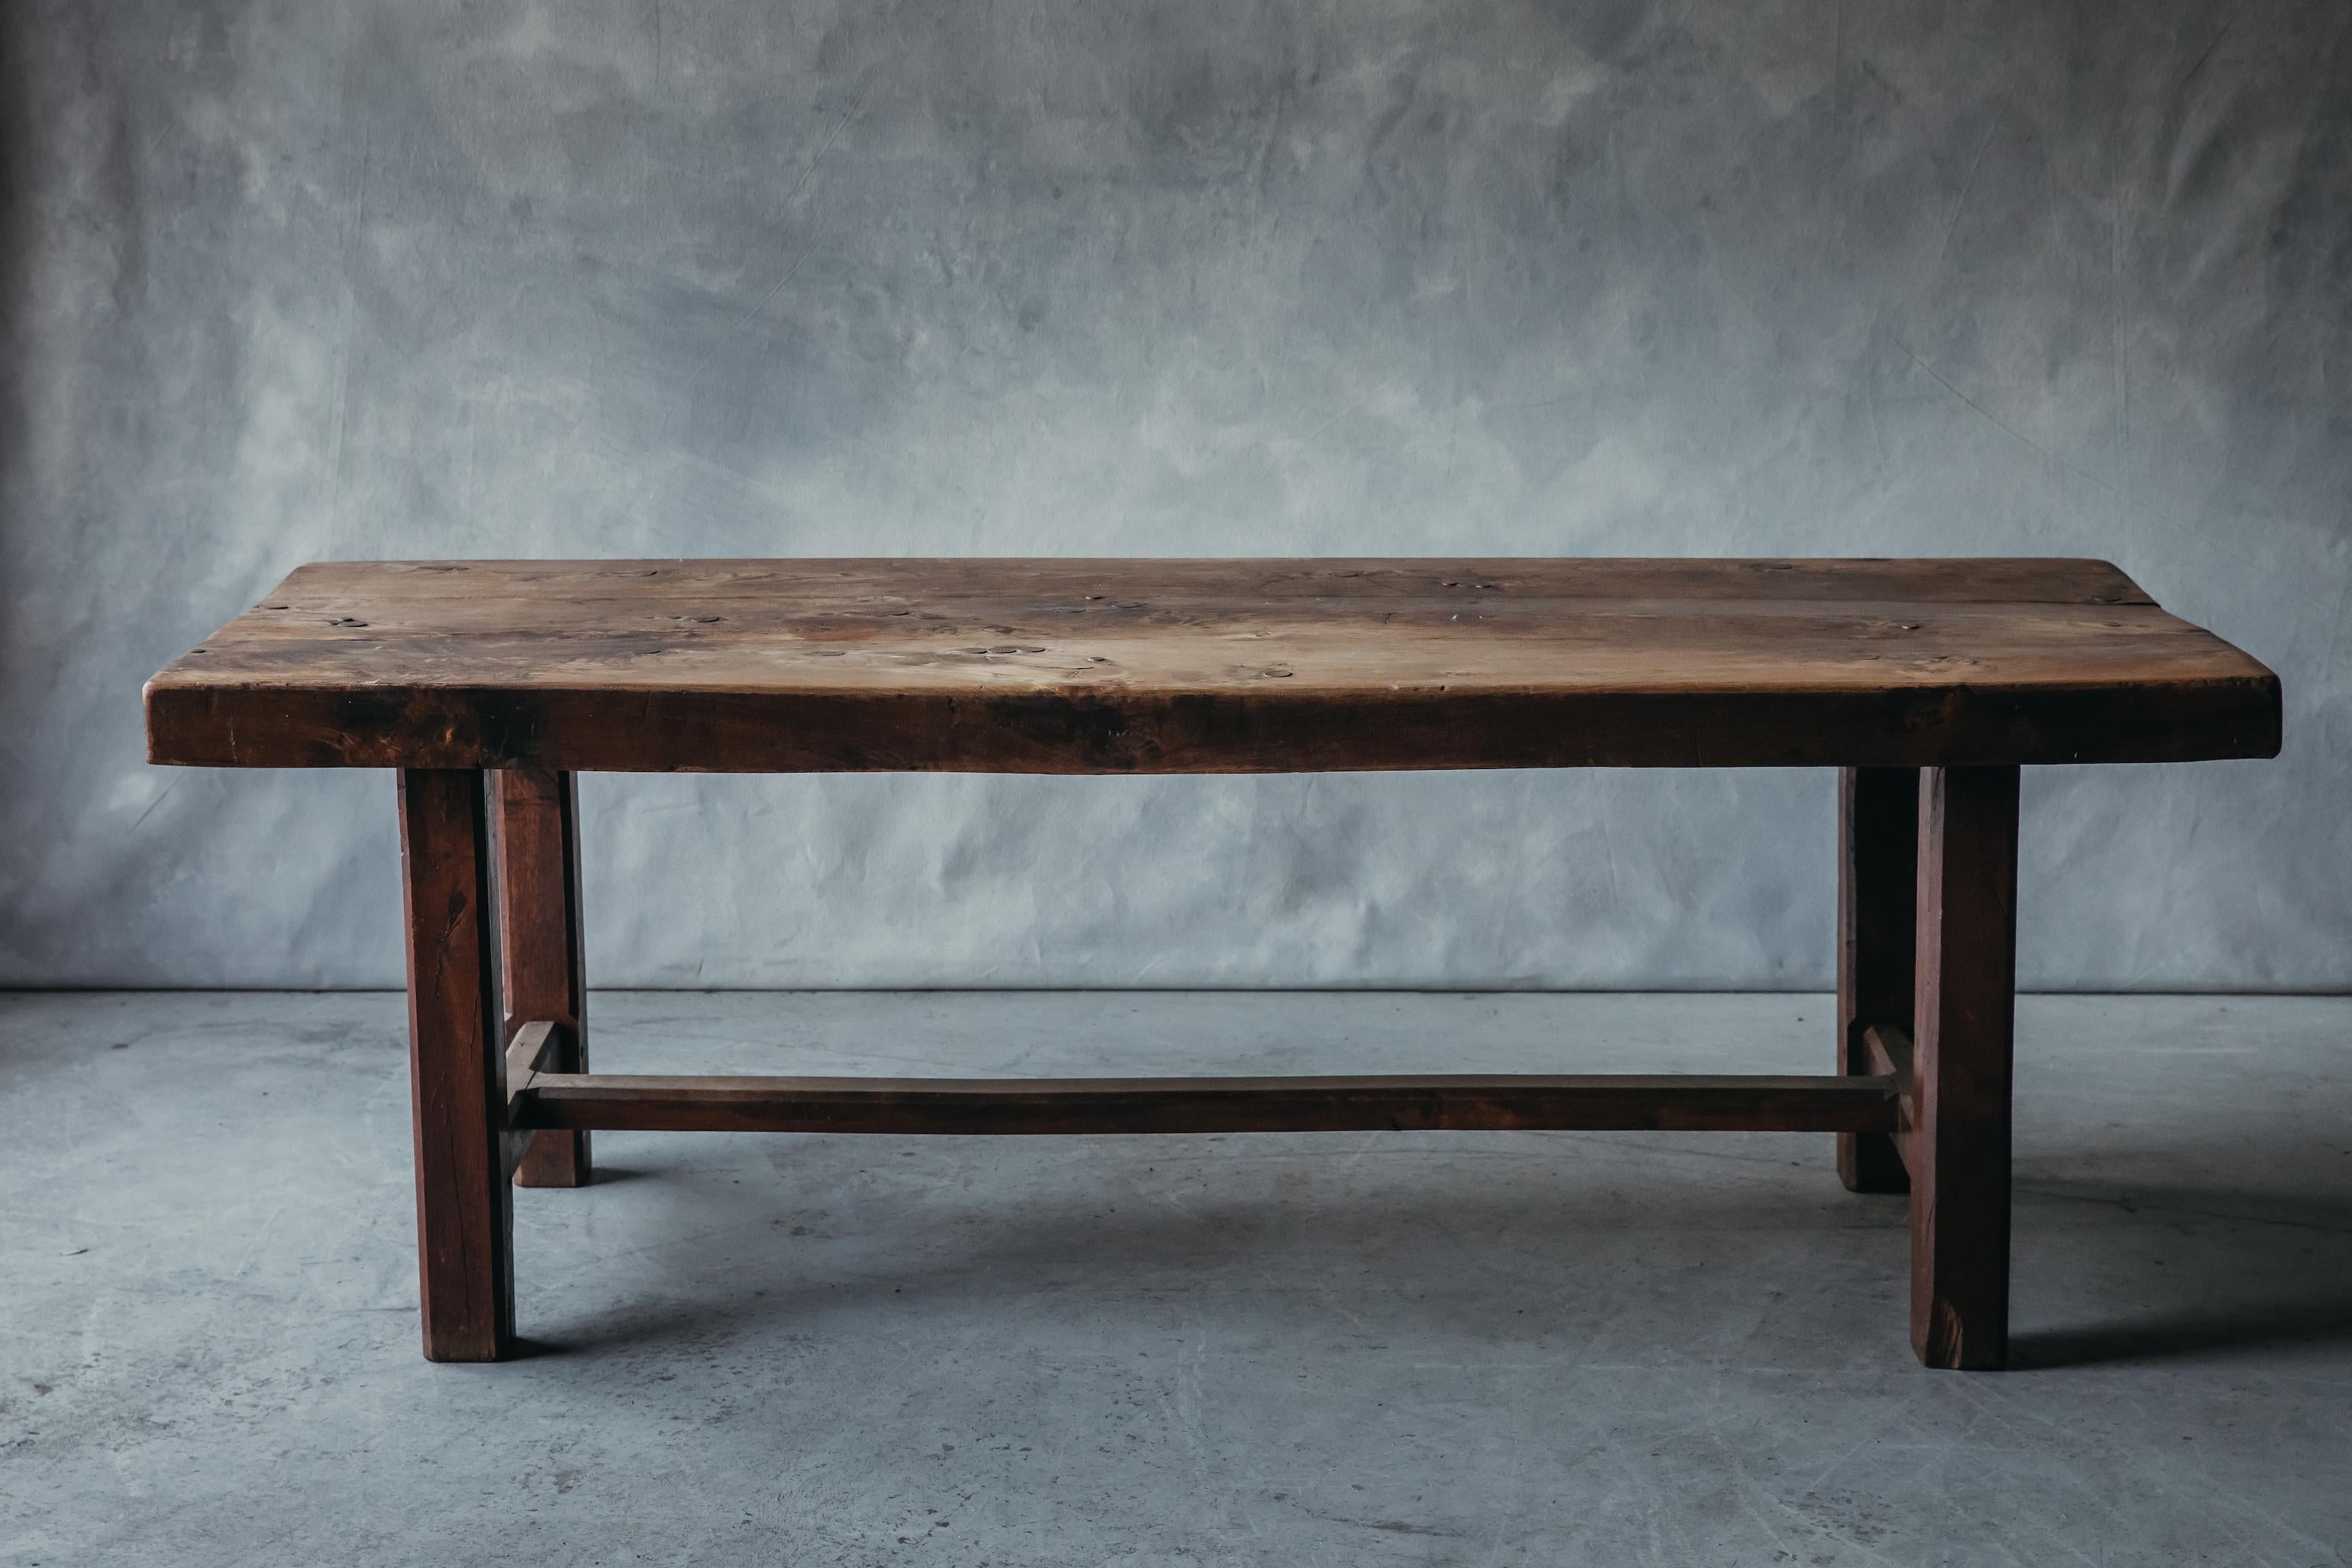 Large Oak Dining Table From France, Circa 1940. Solid oak construction with a superb patina.